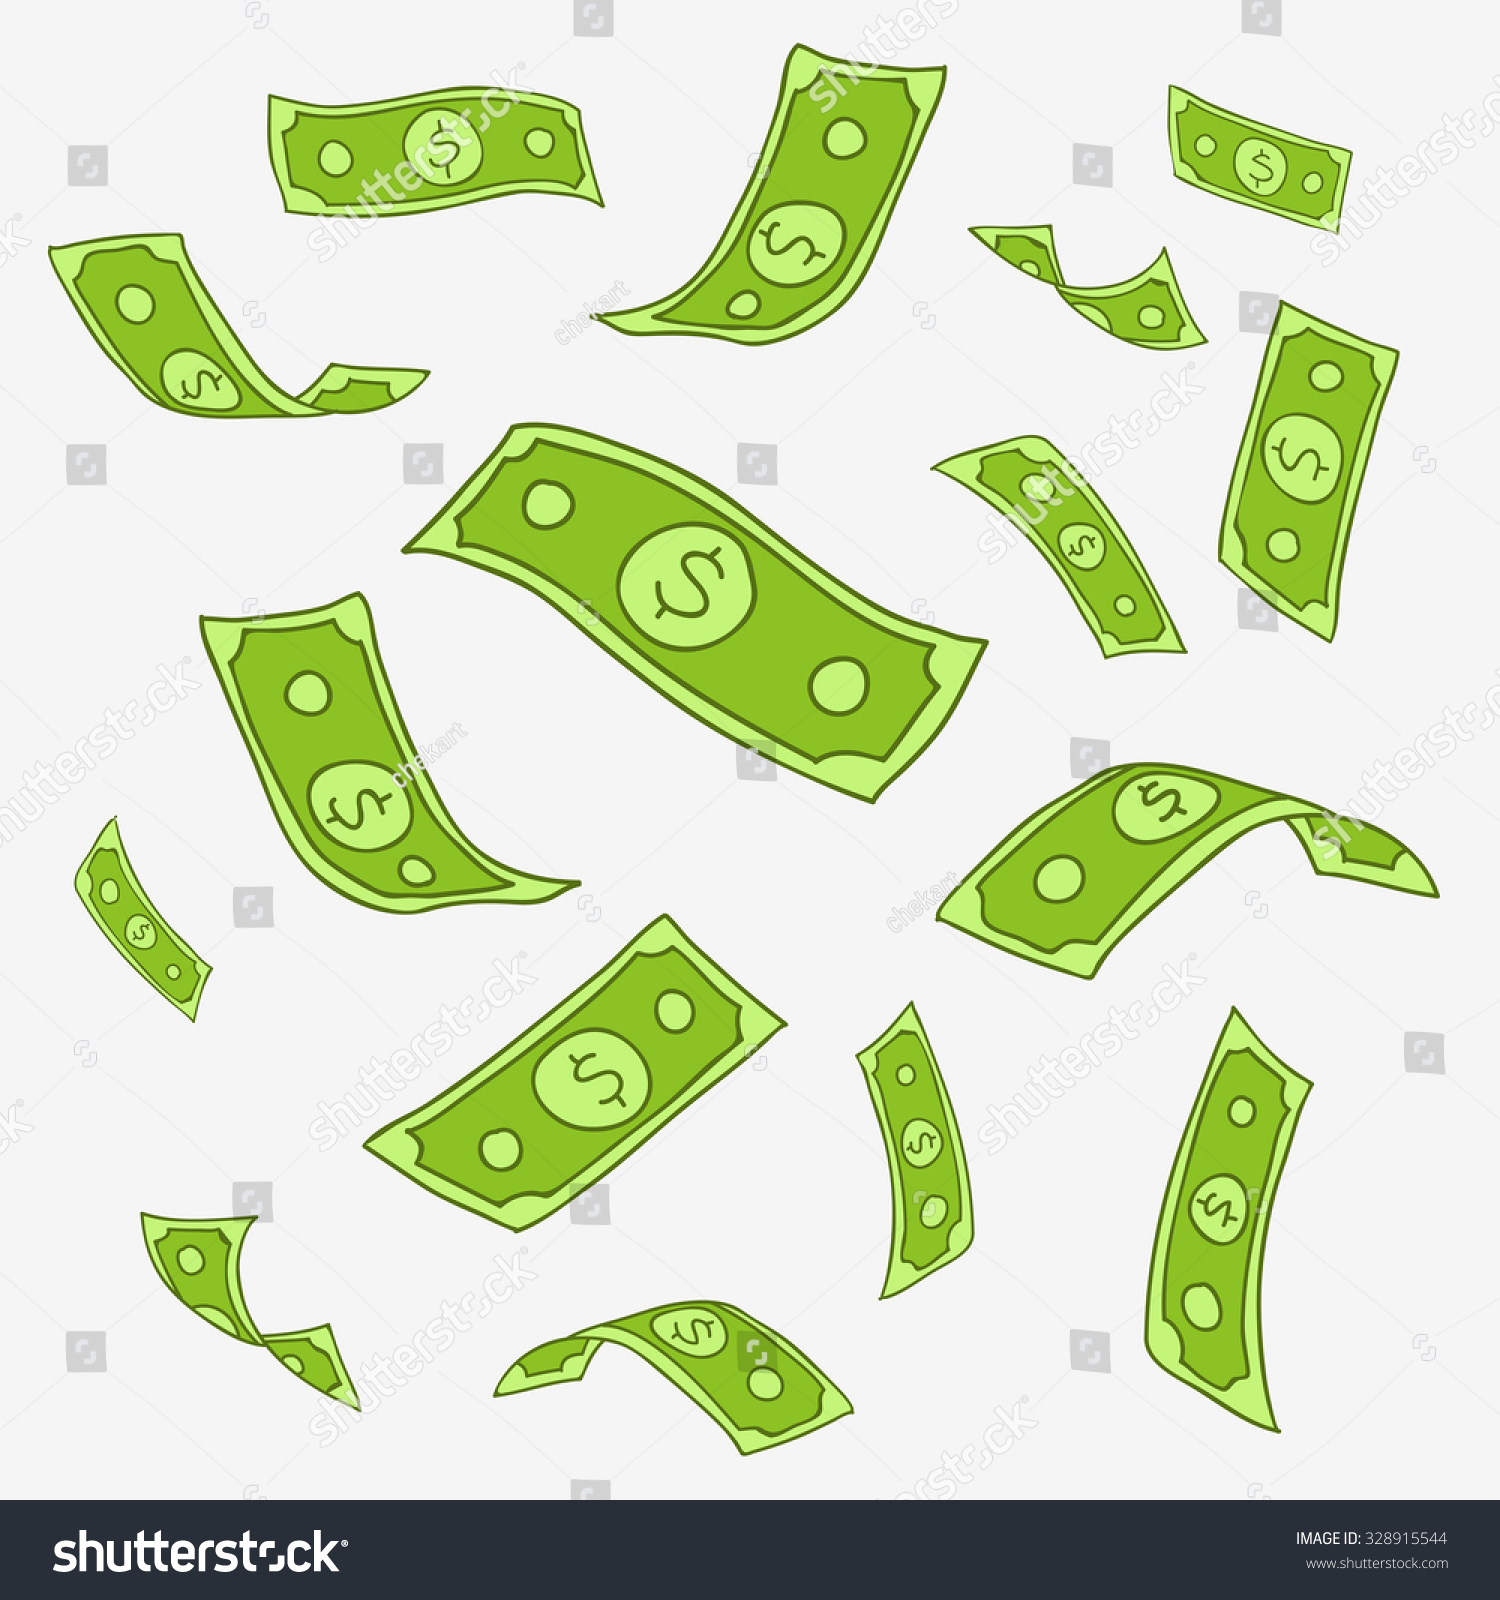 clipart money flying away - photo #16